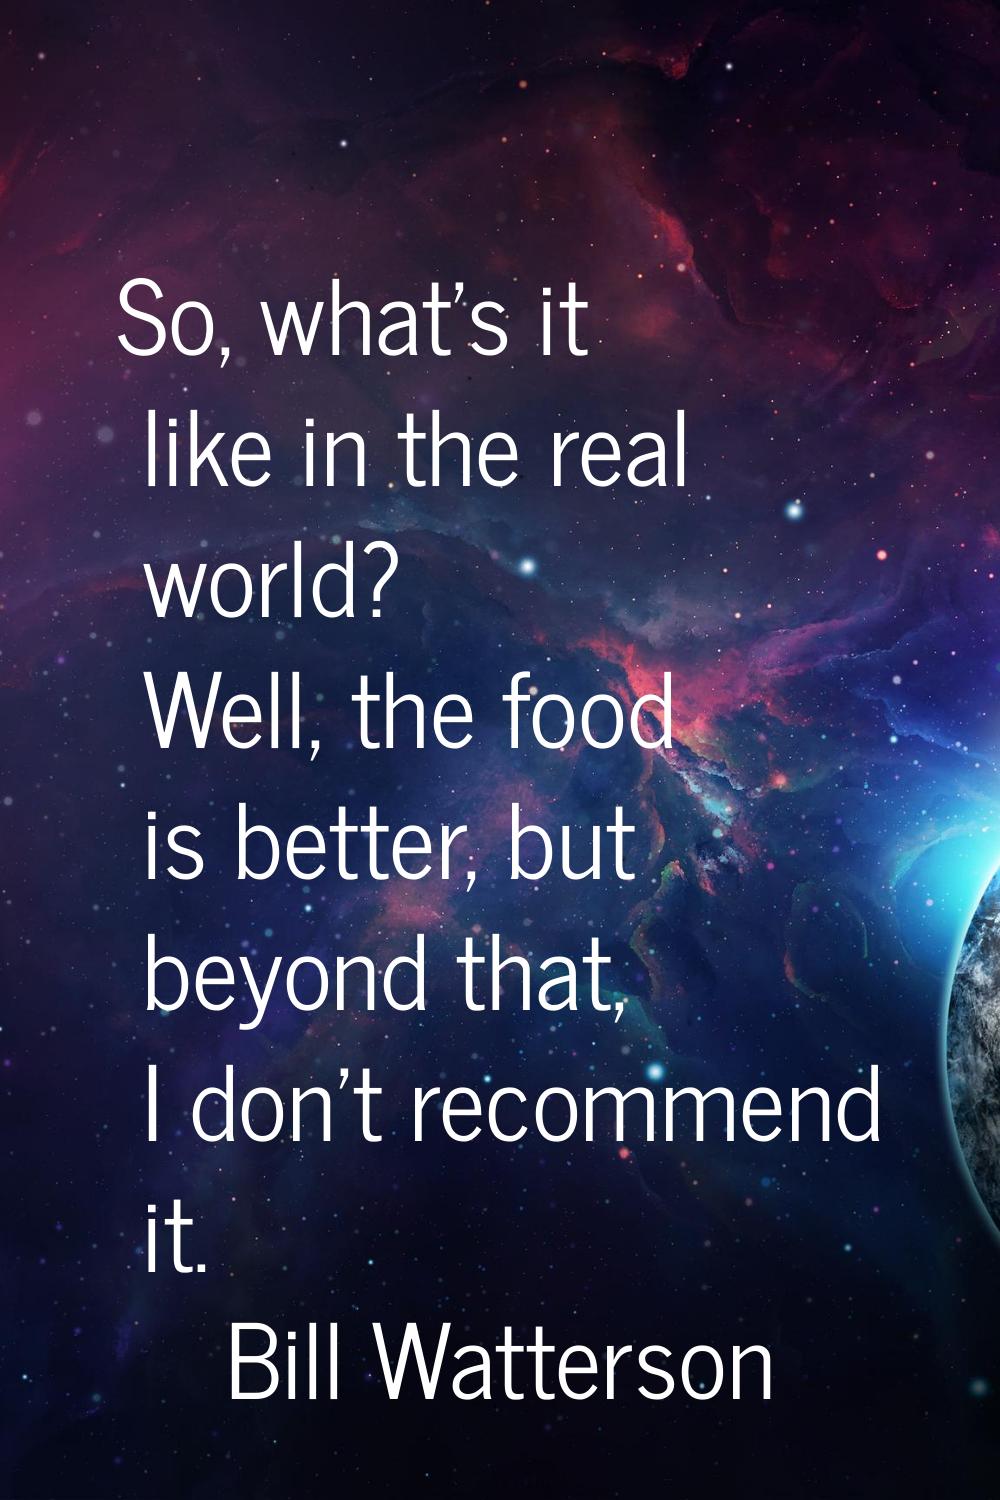 So, what's it like in the real world? Well, the food is better, but beyond that, I don't recommend 